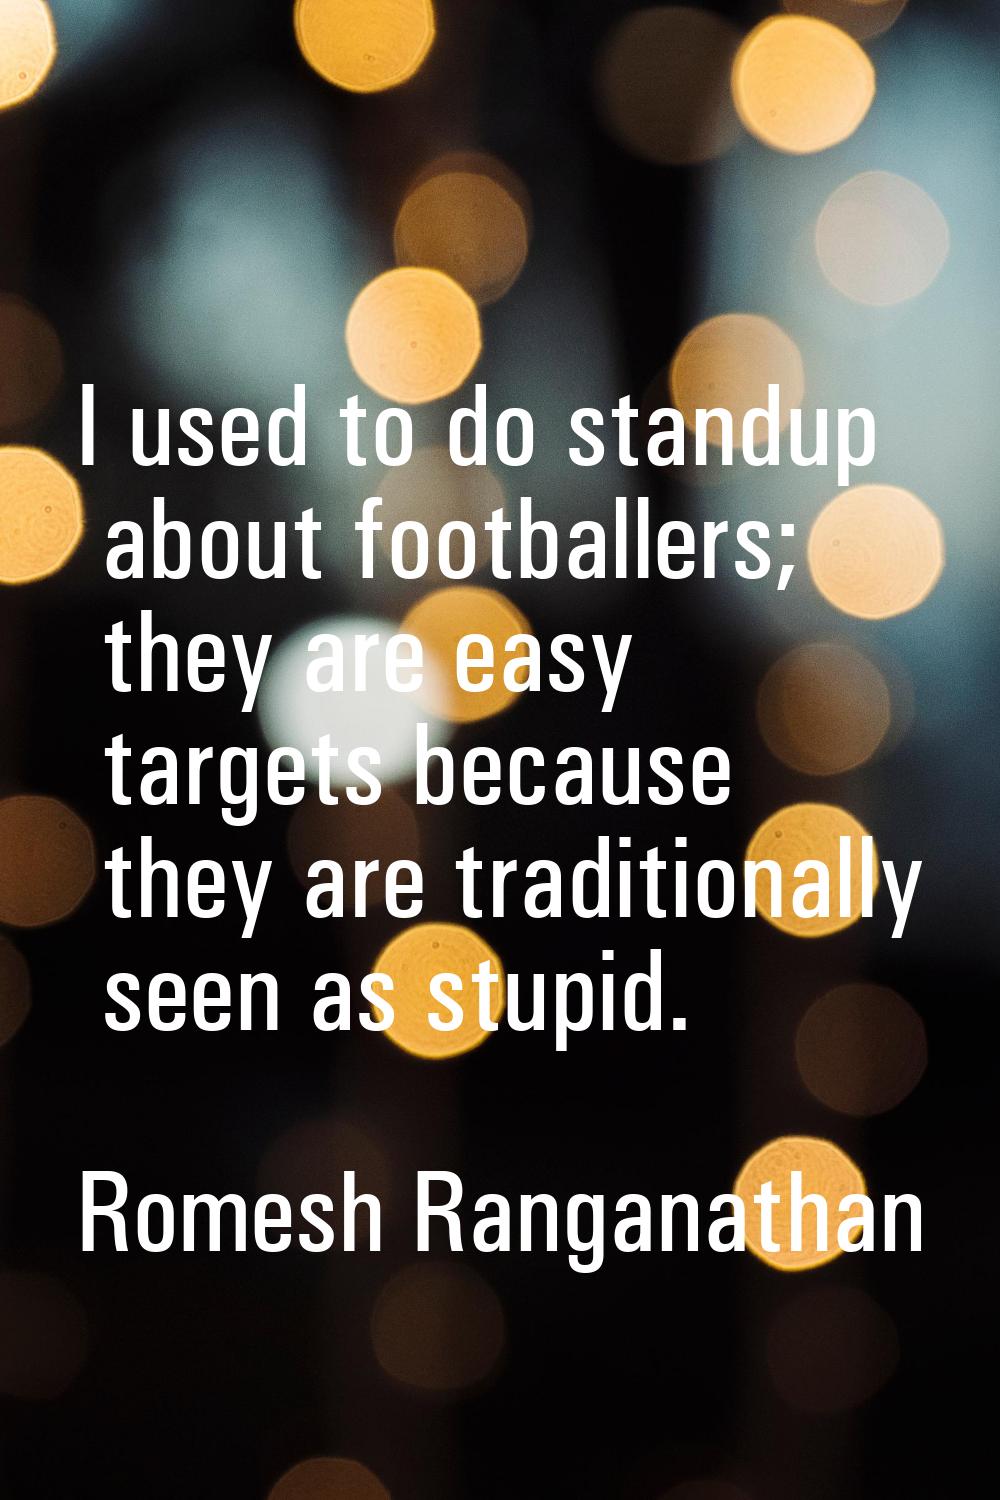 I used to do standup about footballers; they are easy targets because they are traditionally seen a